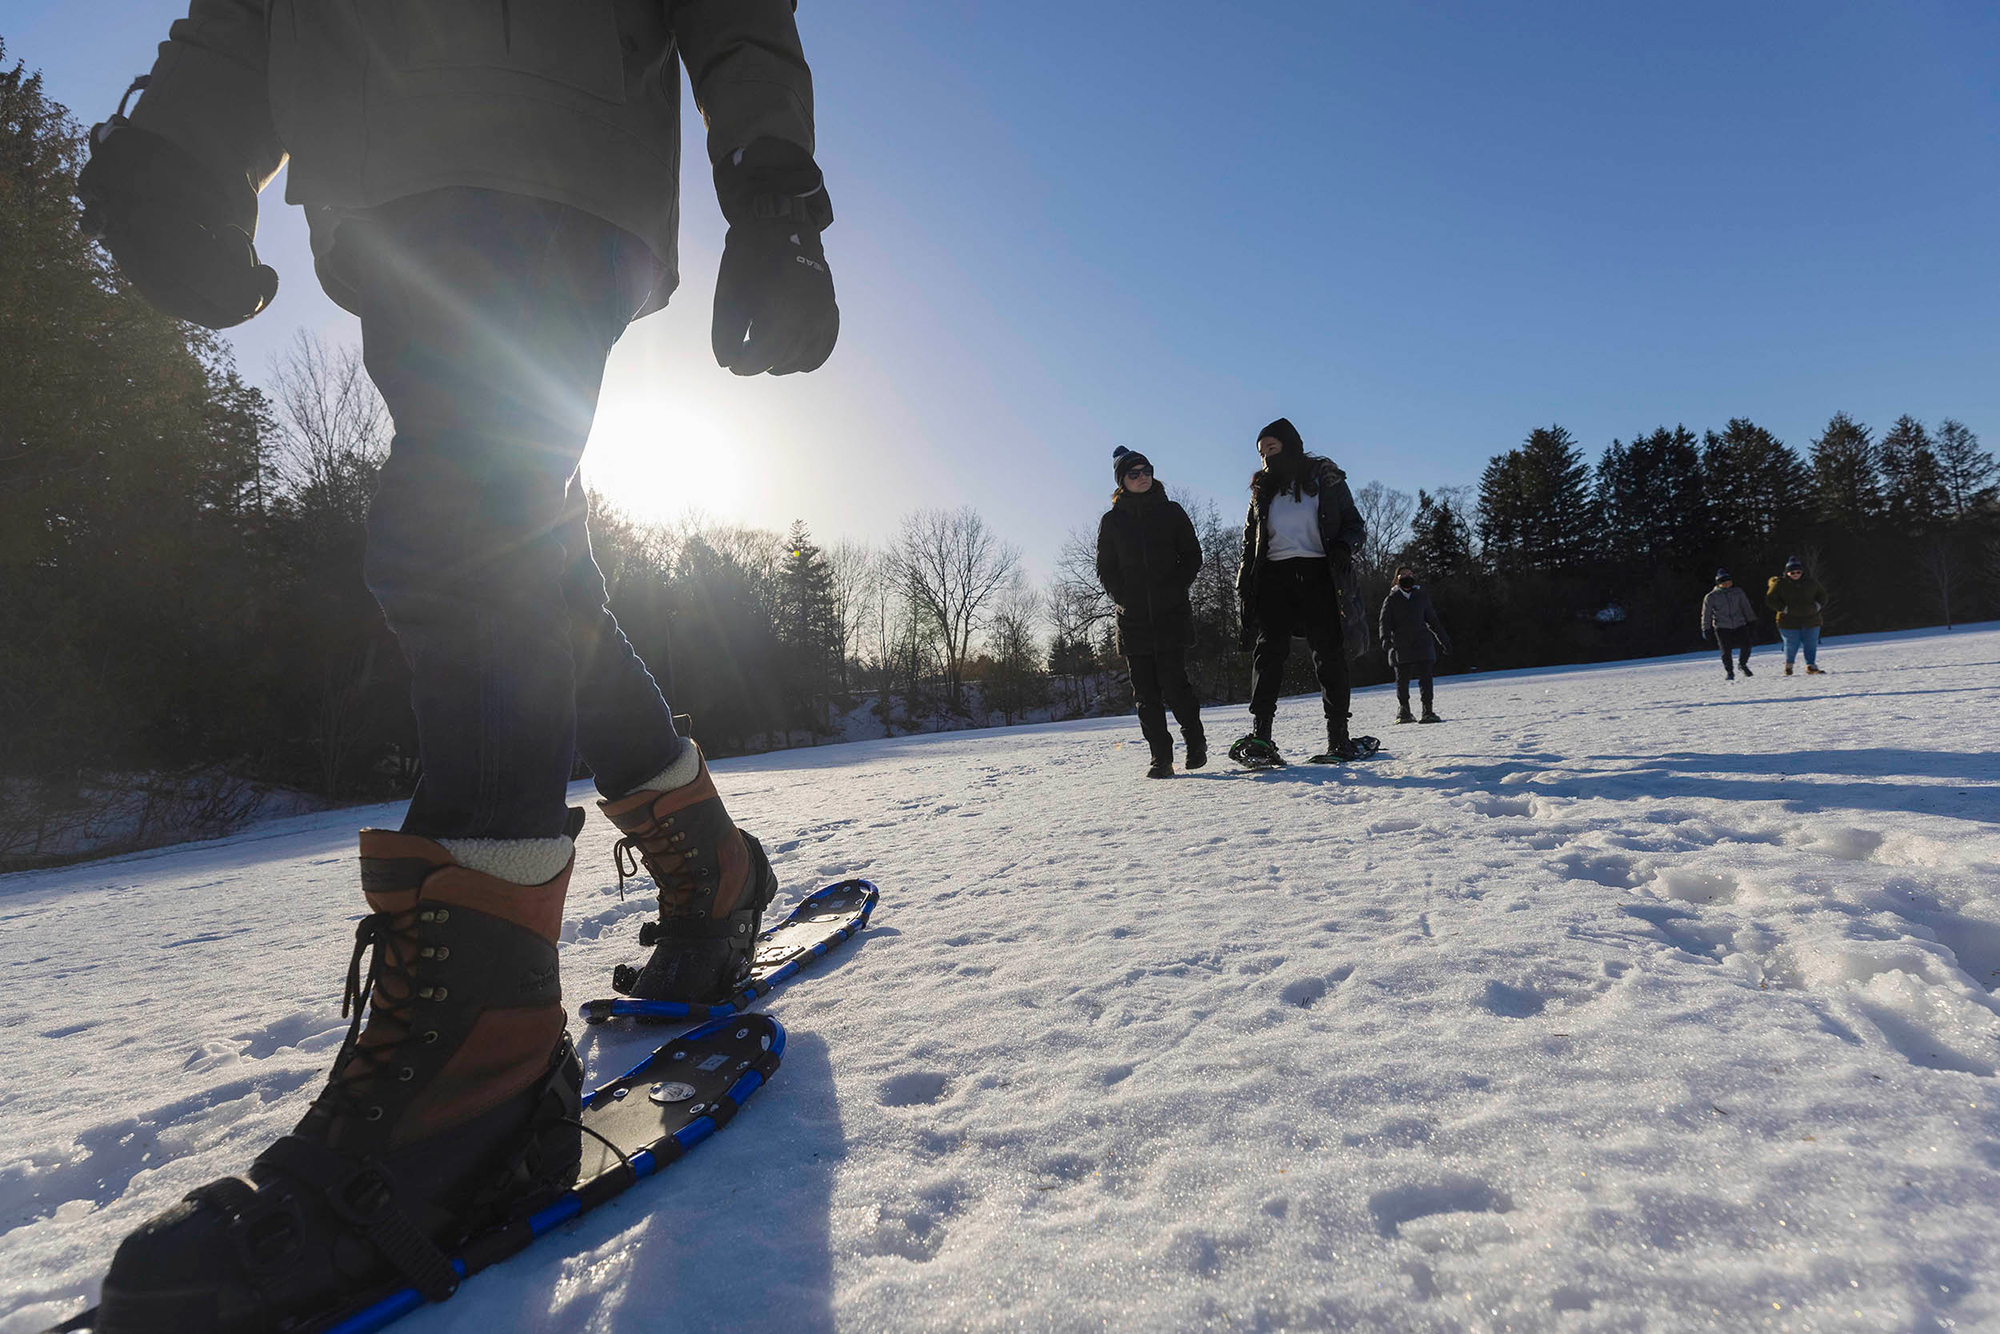 Several students walking in snowshoes in a field of snow on a sunny day